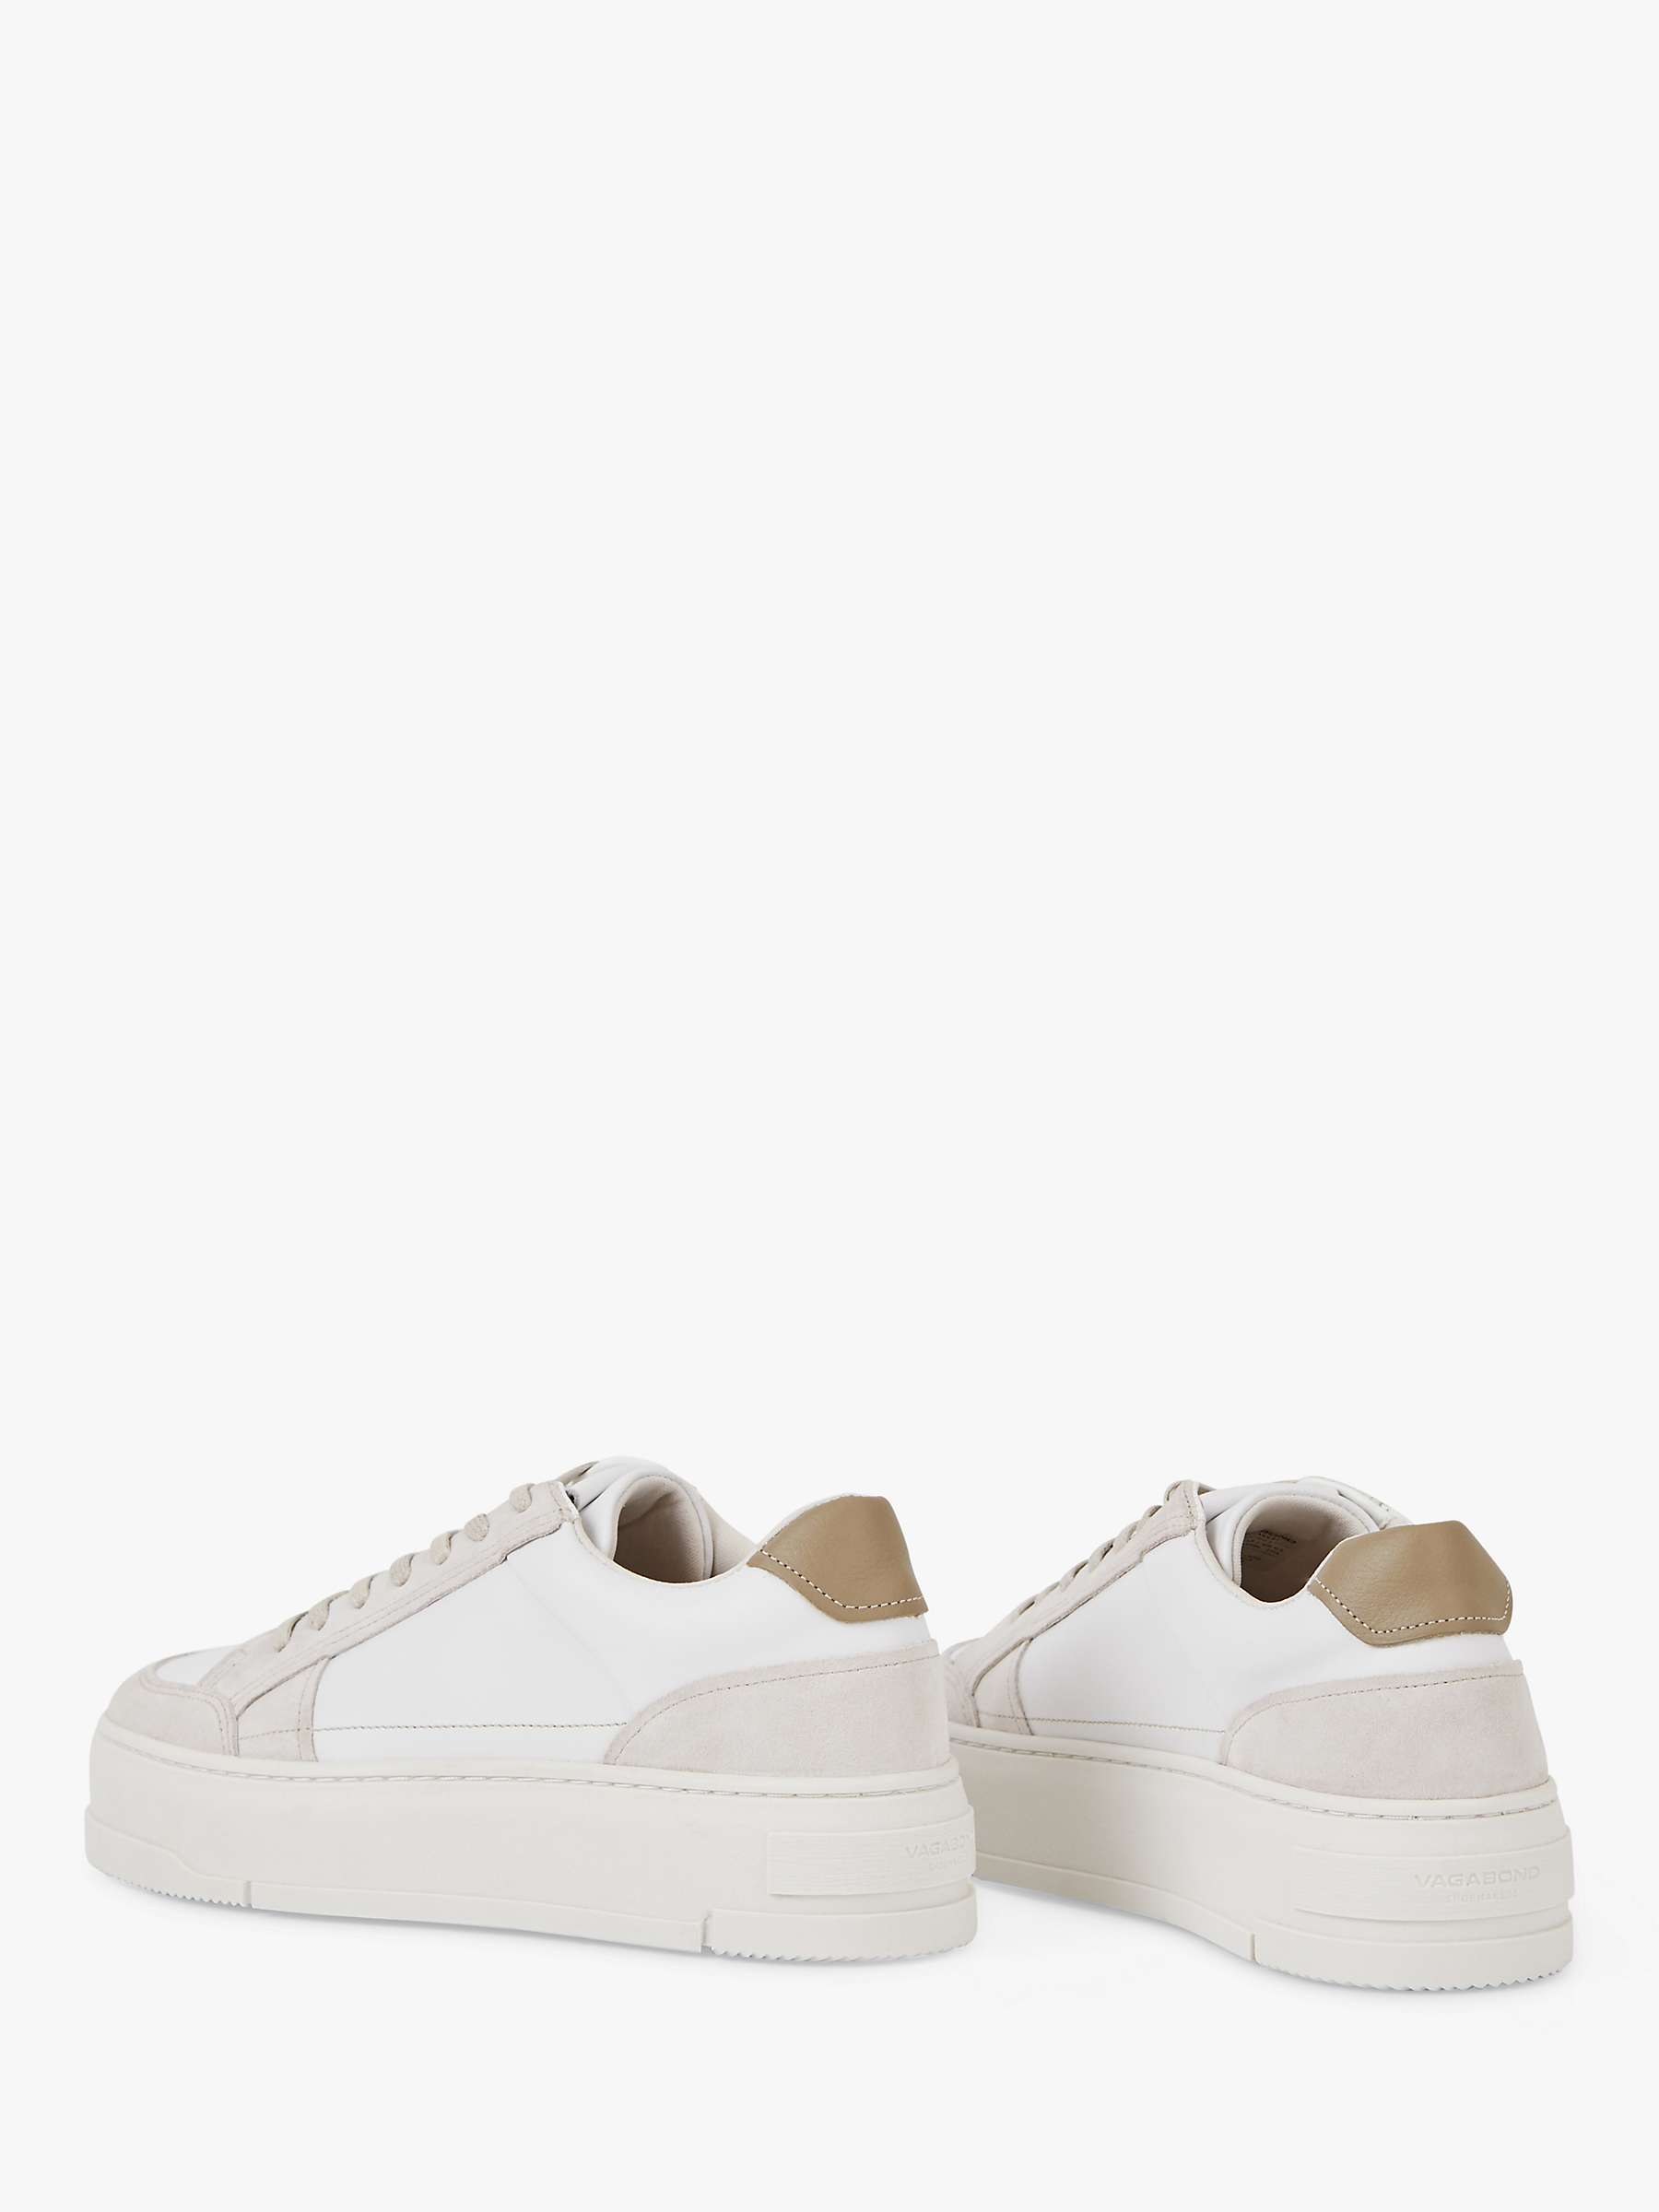 Buy Vagabond Shoemakers Judy Leather Trainers, White Salt Online at johnlewis.com